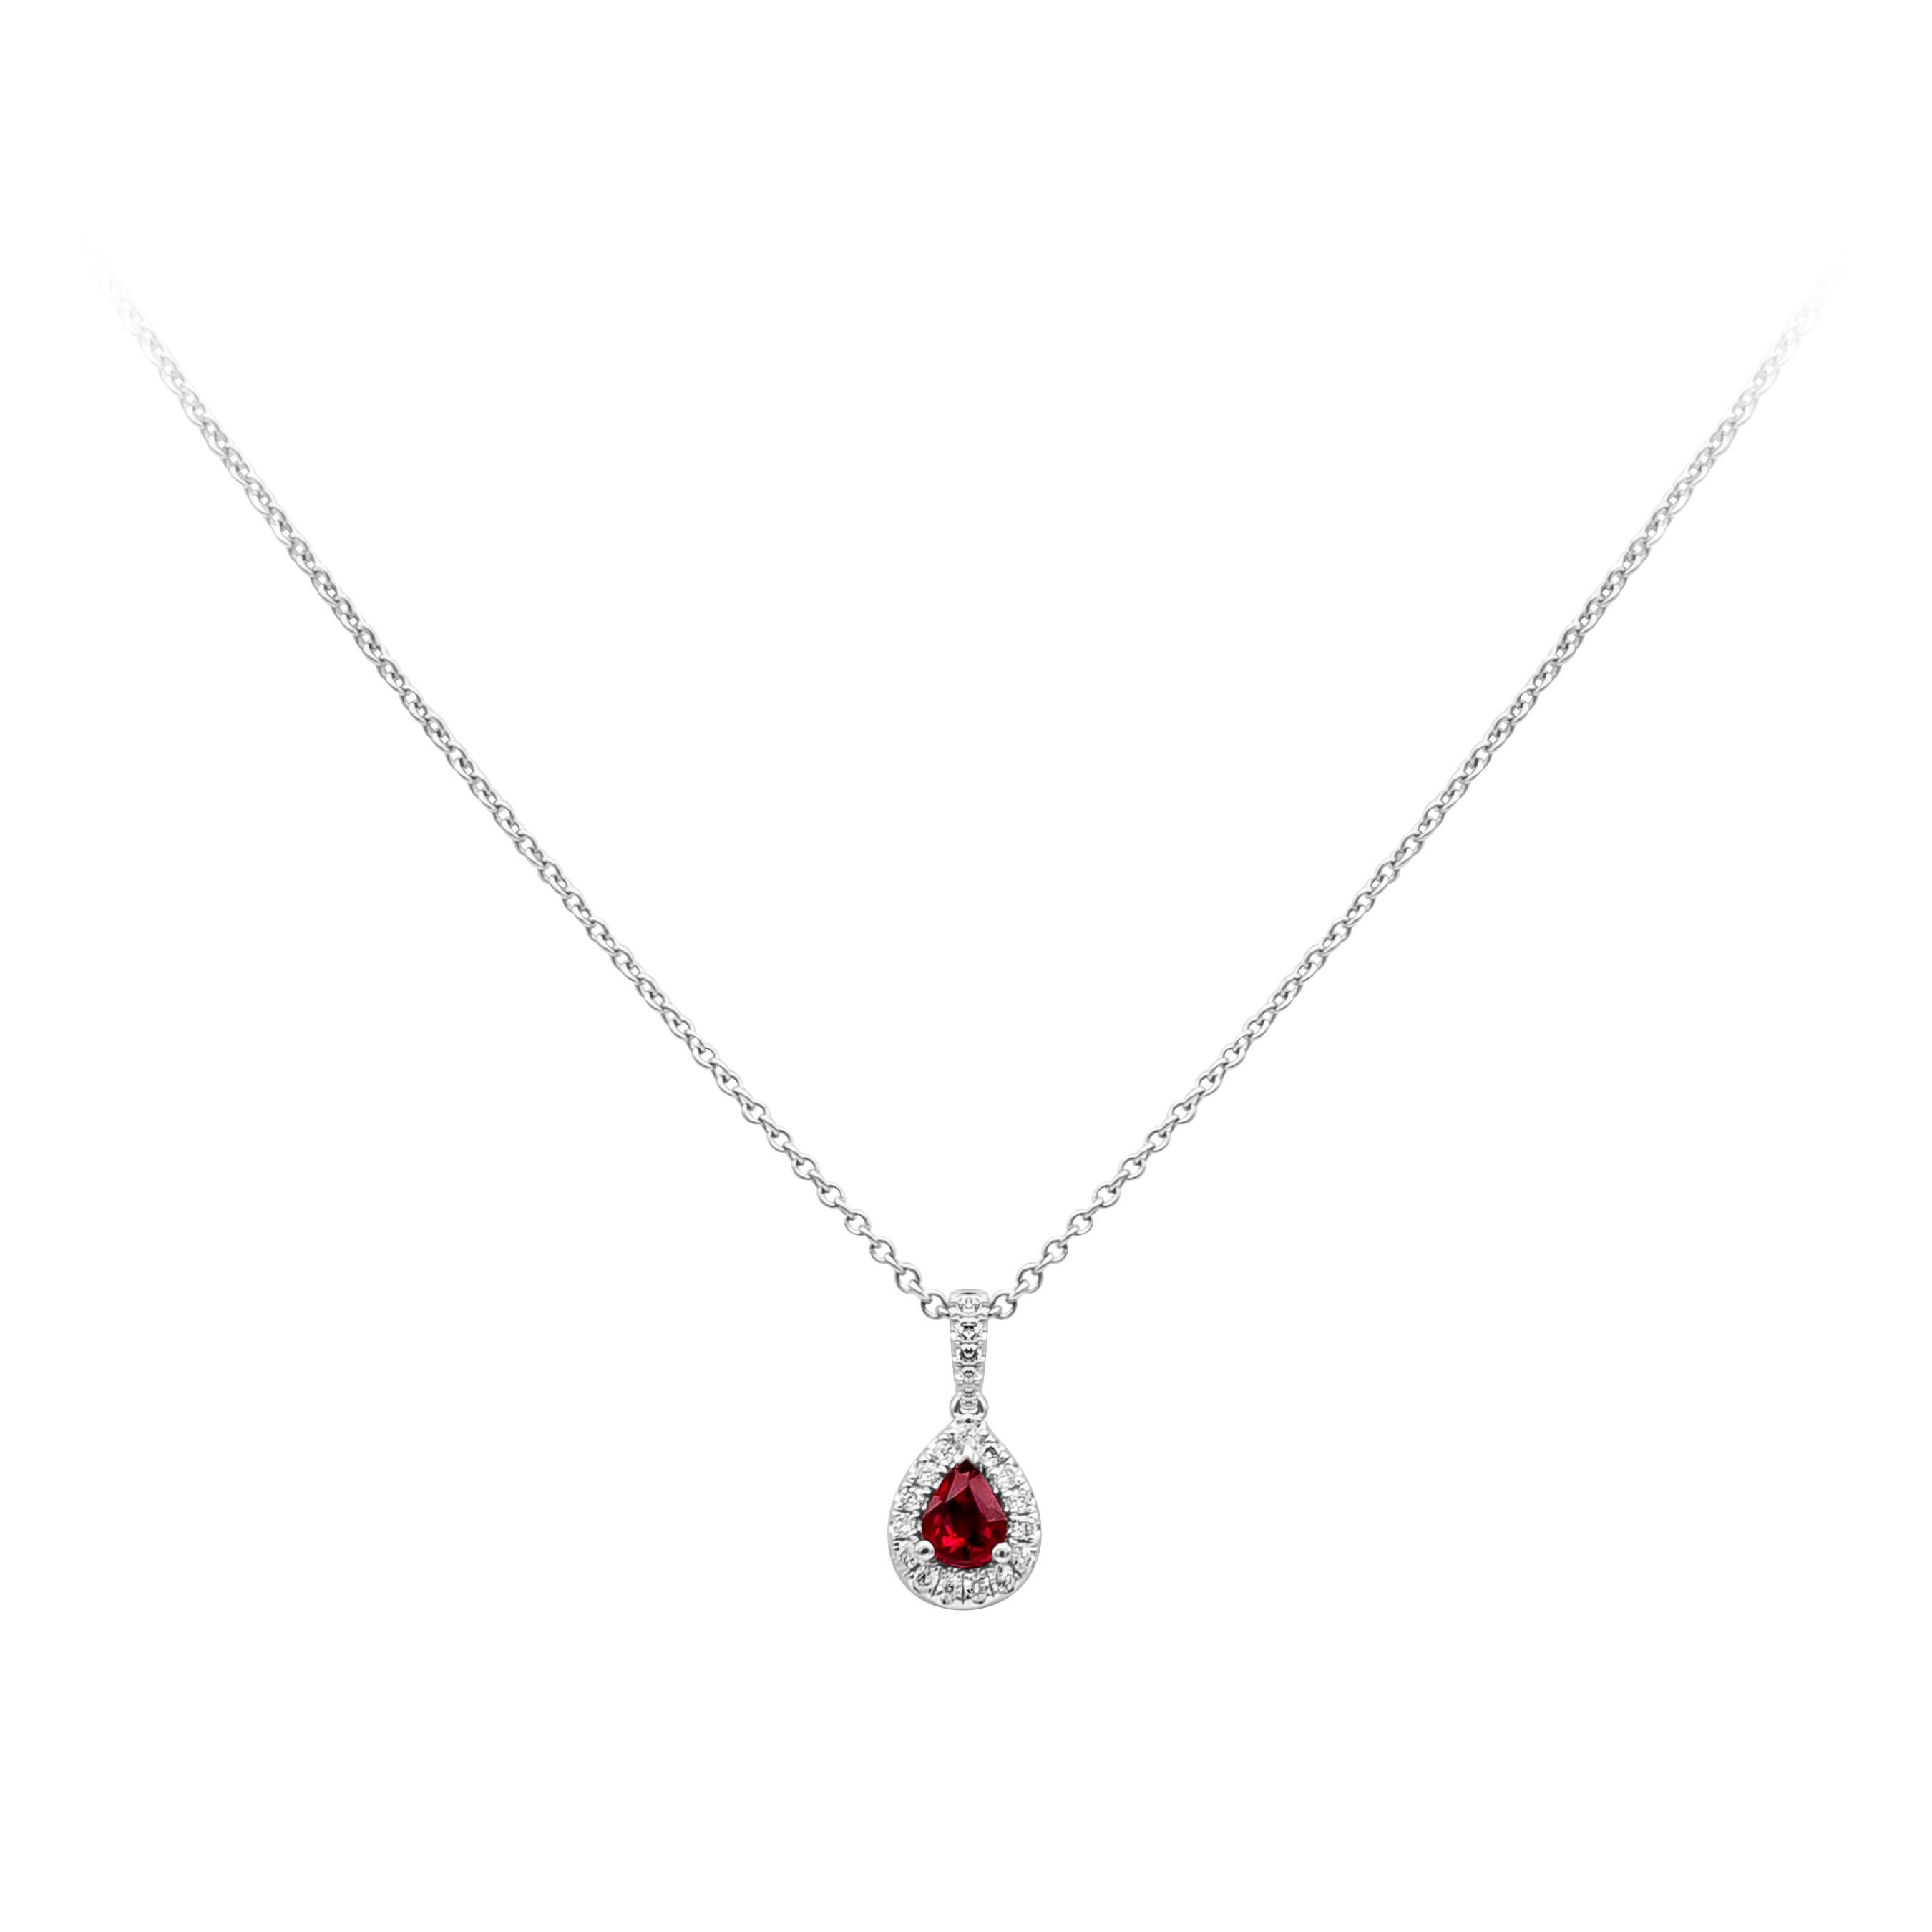 This simple and classic halo pendant necklace showcases a pear shape ruby weighing 0.35 carat, embellished by 20 pieces of round diamonds, weighing 0.11 carat total, F color and VS in clarity. Made in 14k and 18K White Gold. Suspended on 18 inches